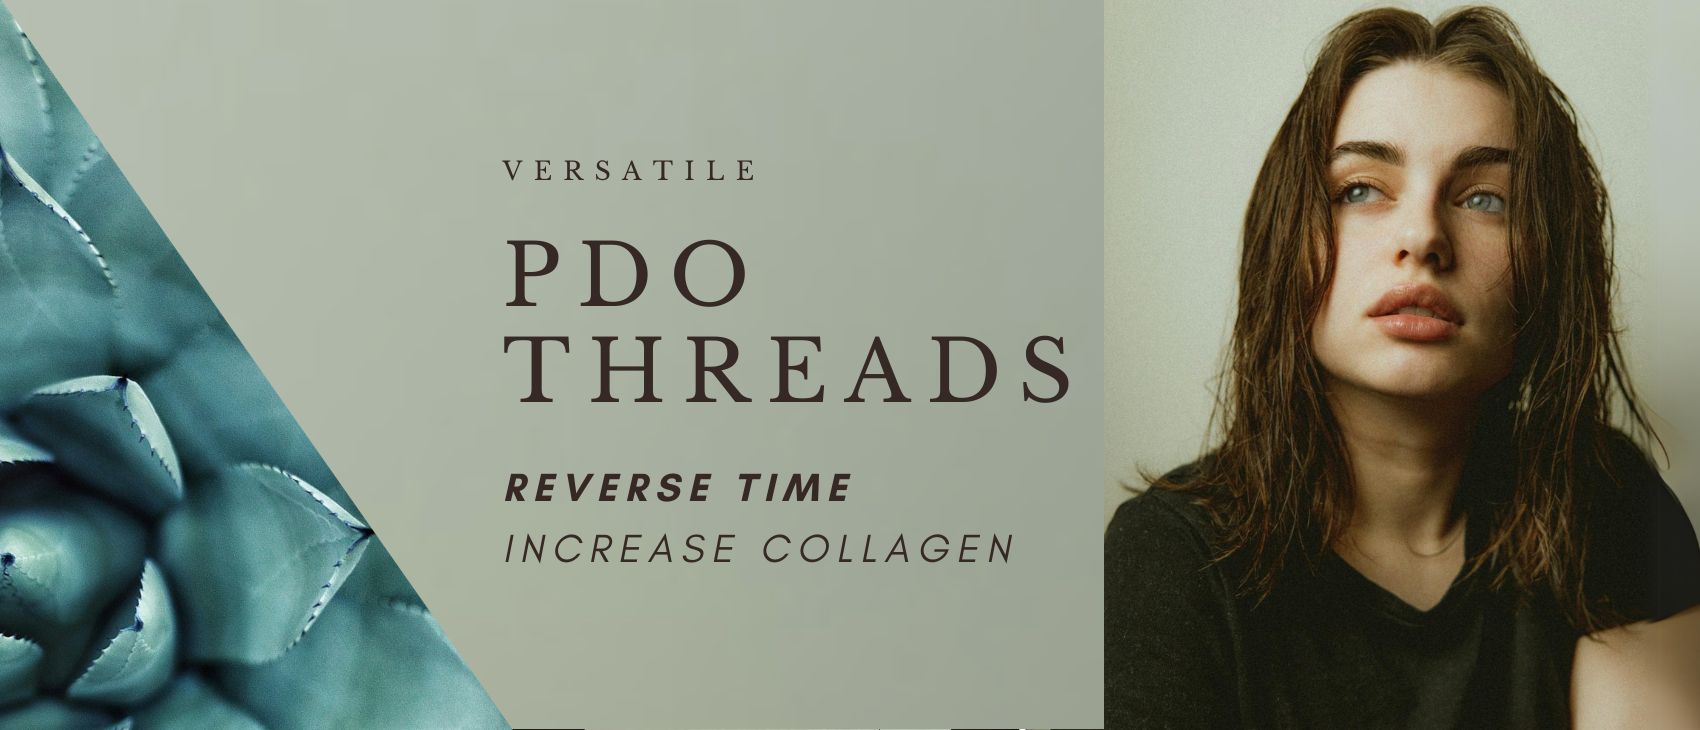 PDO Thread Image Banner to Advertise its highlights being versatile and how it increases collagen